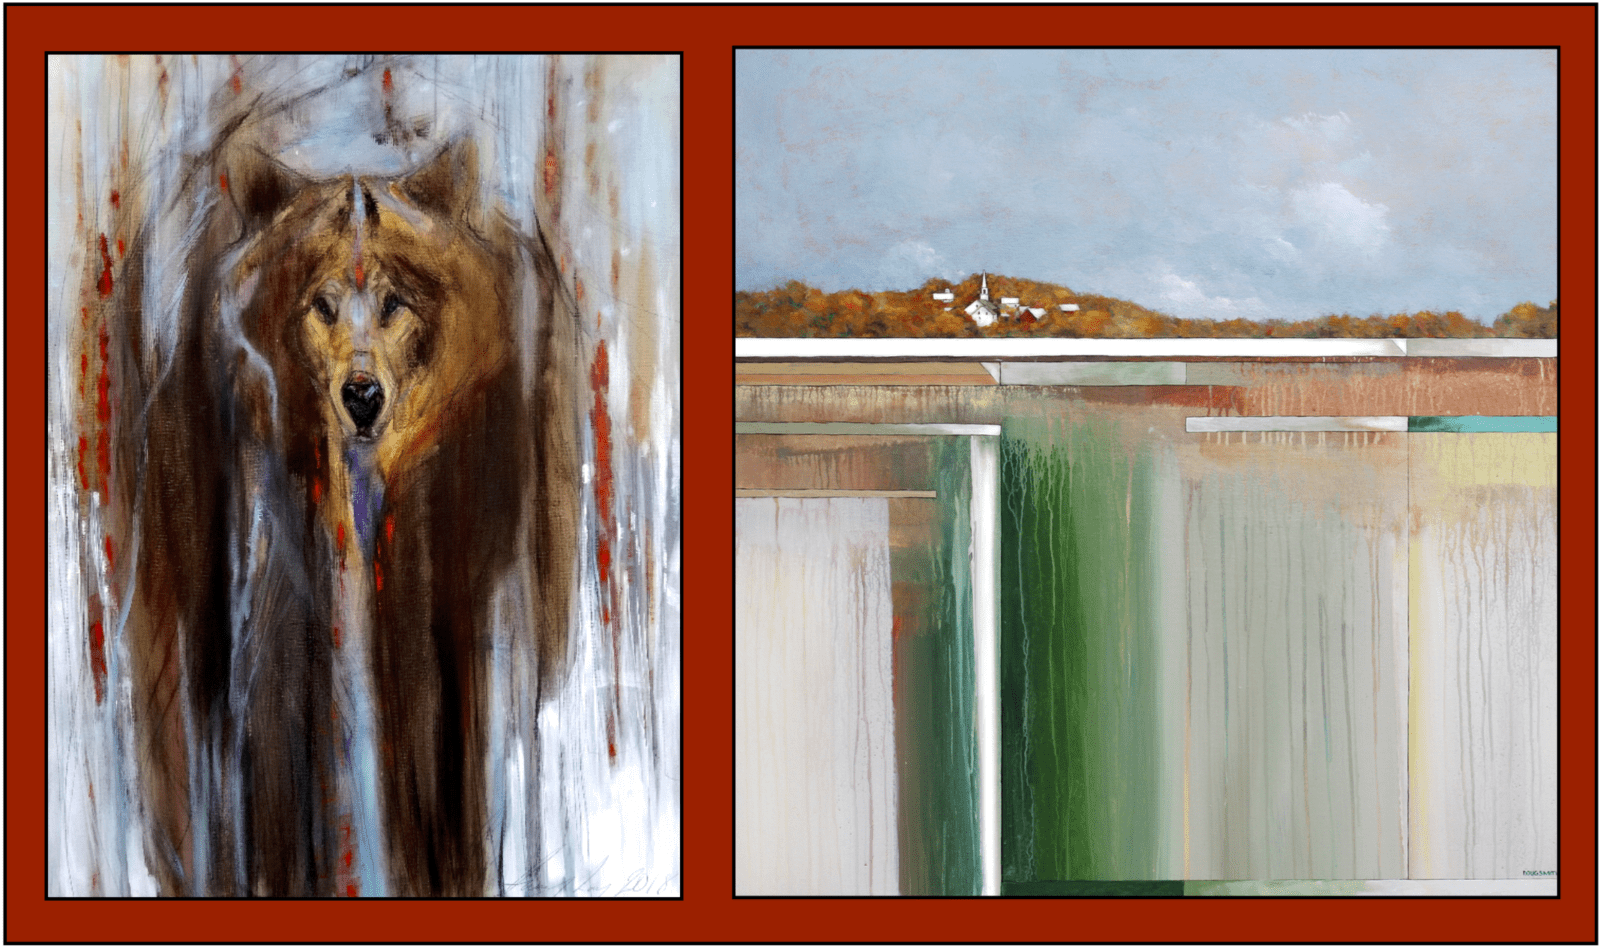 Two paintings of a bear and a mountain.